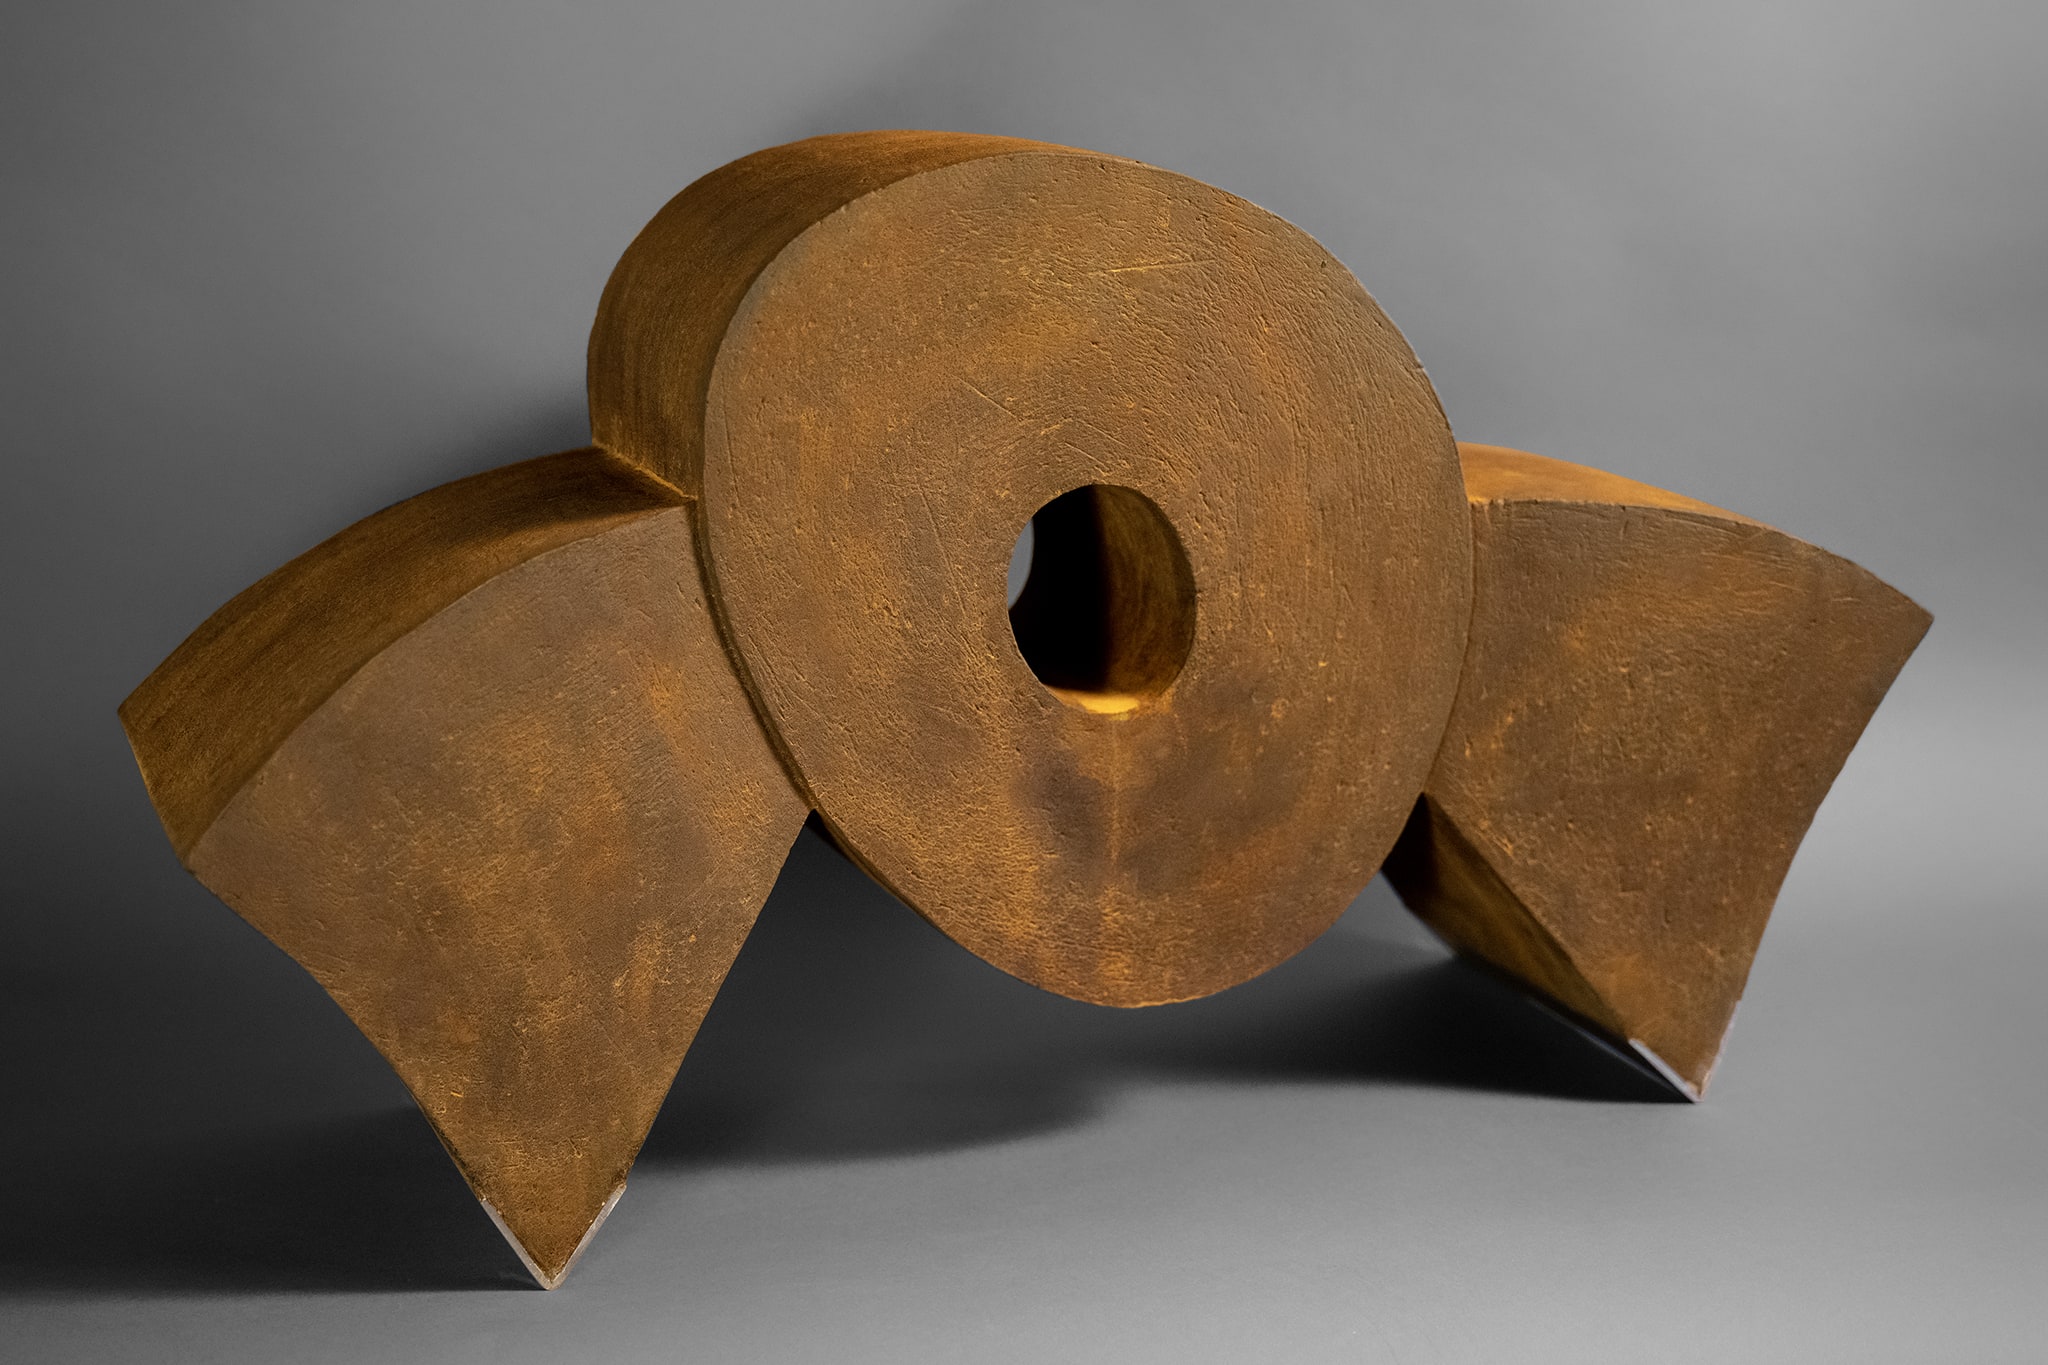 On Edge I, 12.5" H x 21.5" W x 7.5" D, clay with iron oxide finish, stainless steel